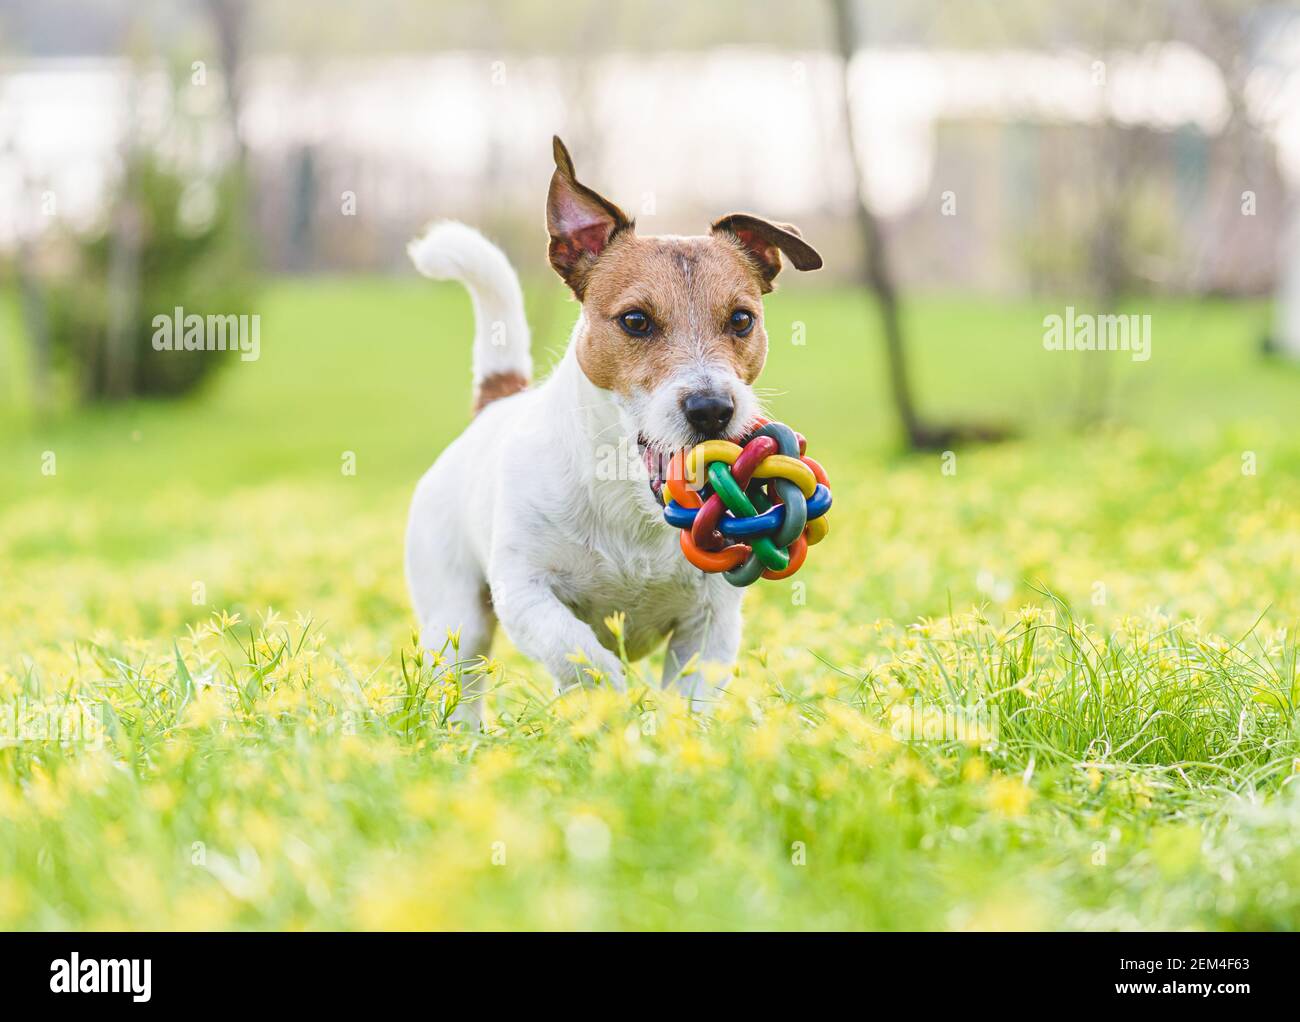 Family pet dog playing with colorful toy on spring lawn in flowers Stock Photo